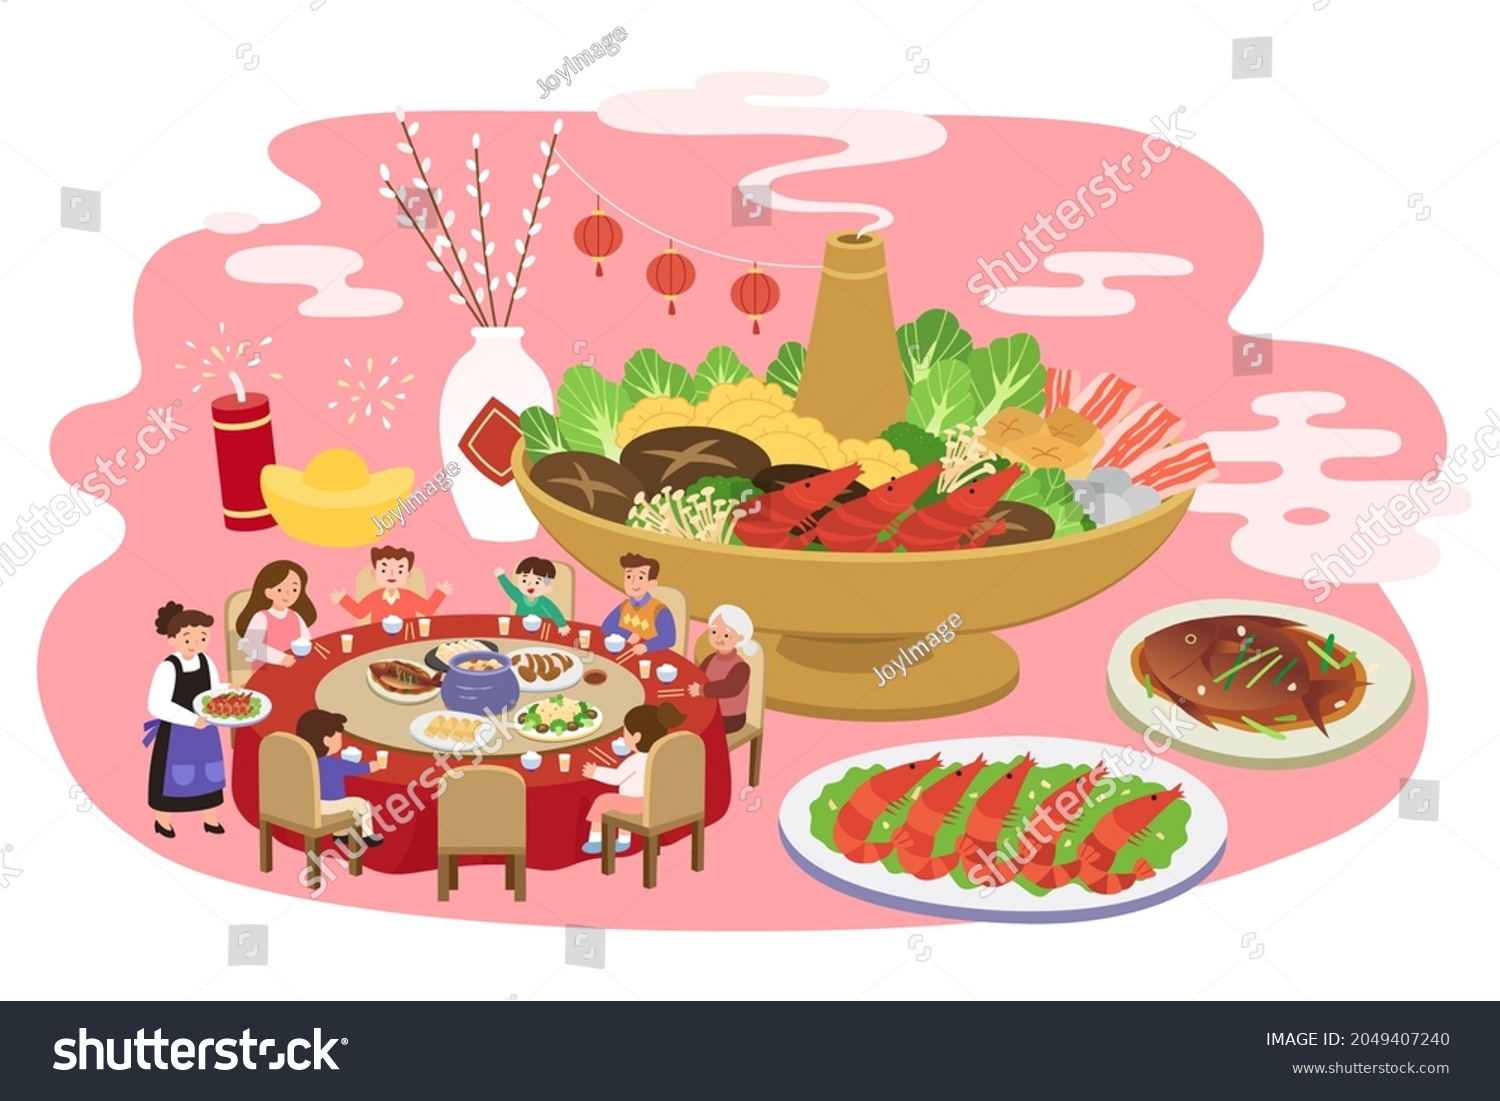 SVG of CNY reunion dinner elements. Asian family group having reunion dinner on the round table at a restaurant and some special dishes are featured on the side svg